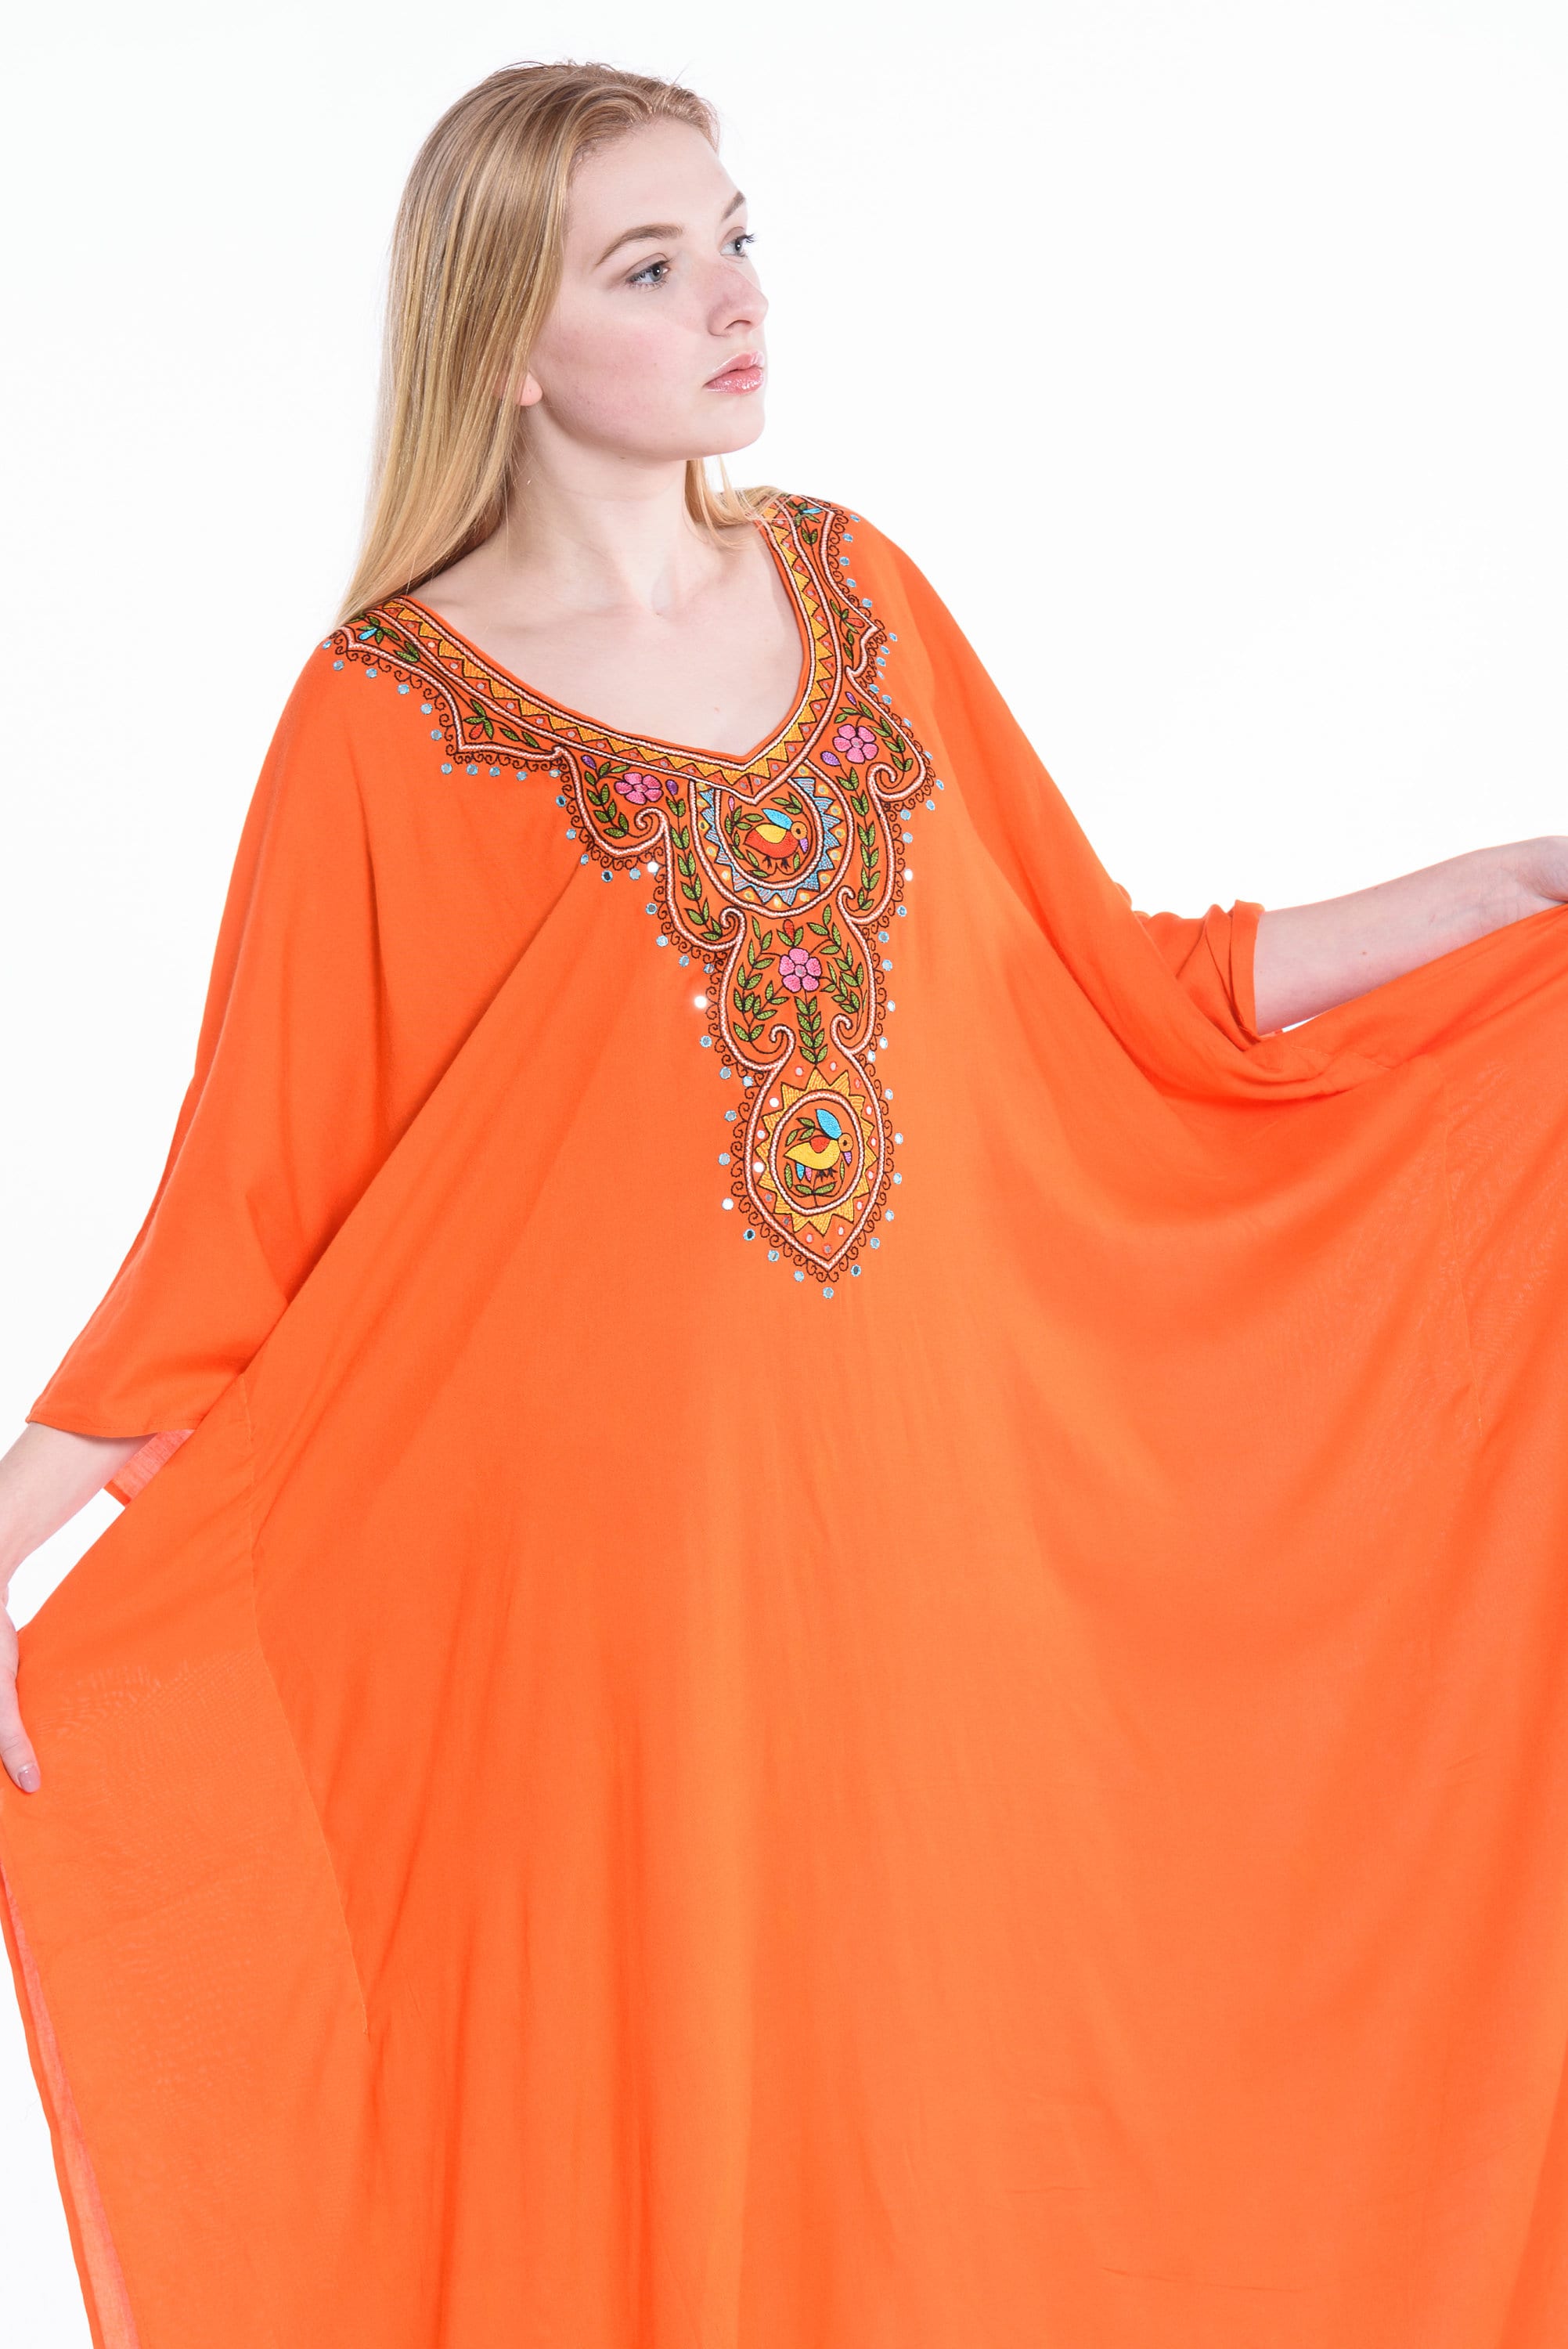 Vibrant Women's Caftans: Your Must-Have Boho-Chic Wardrobe Addition